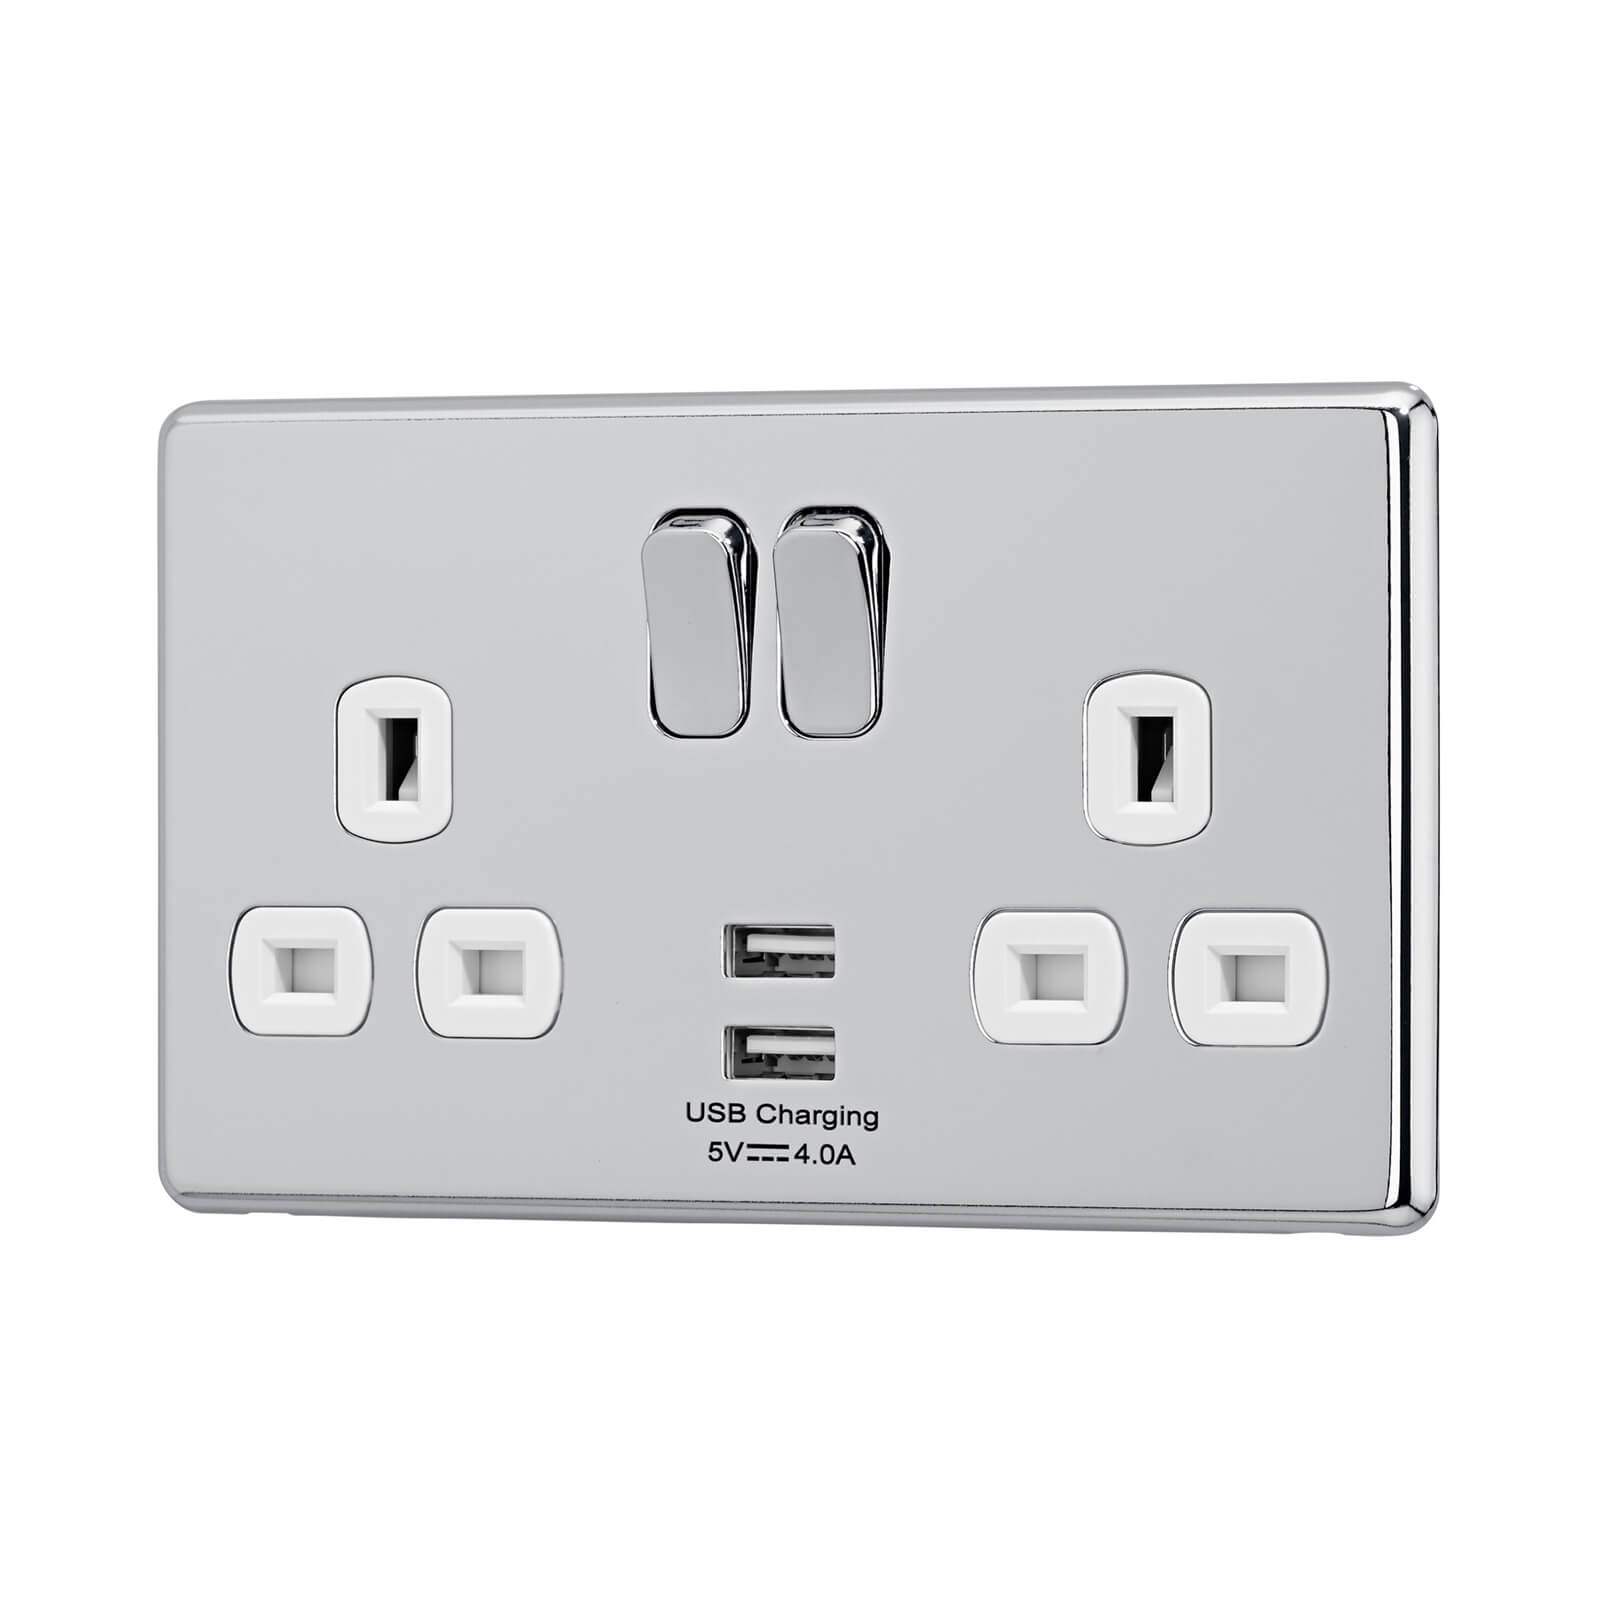 Arlec Fusion 13A 2 Gang Polished Chrome Double switched socket with 2x4A USB